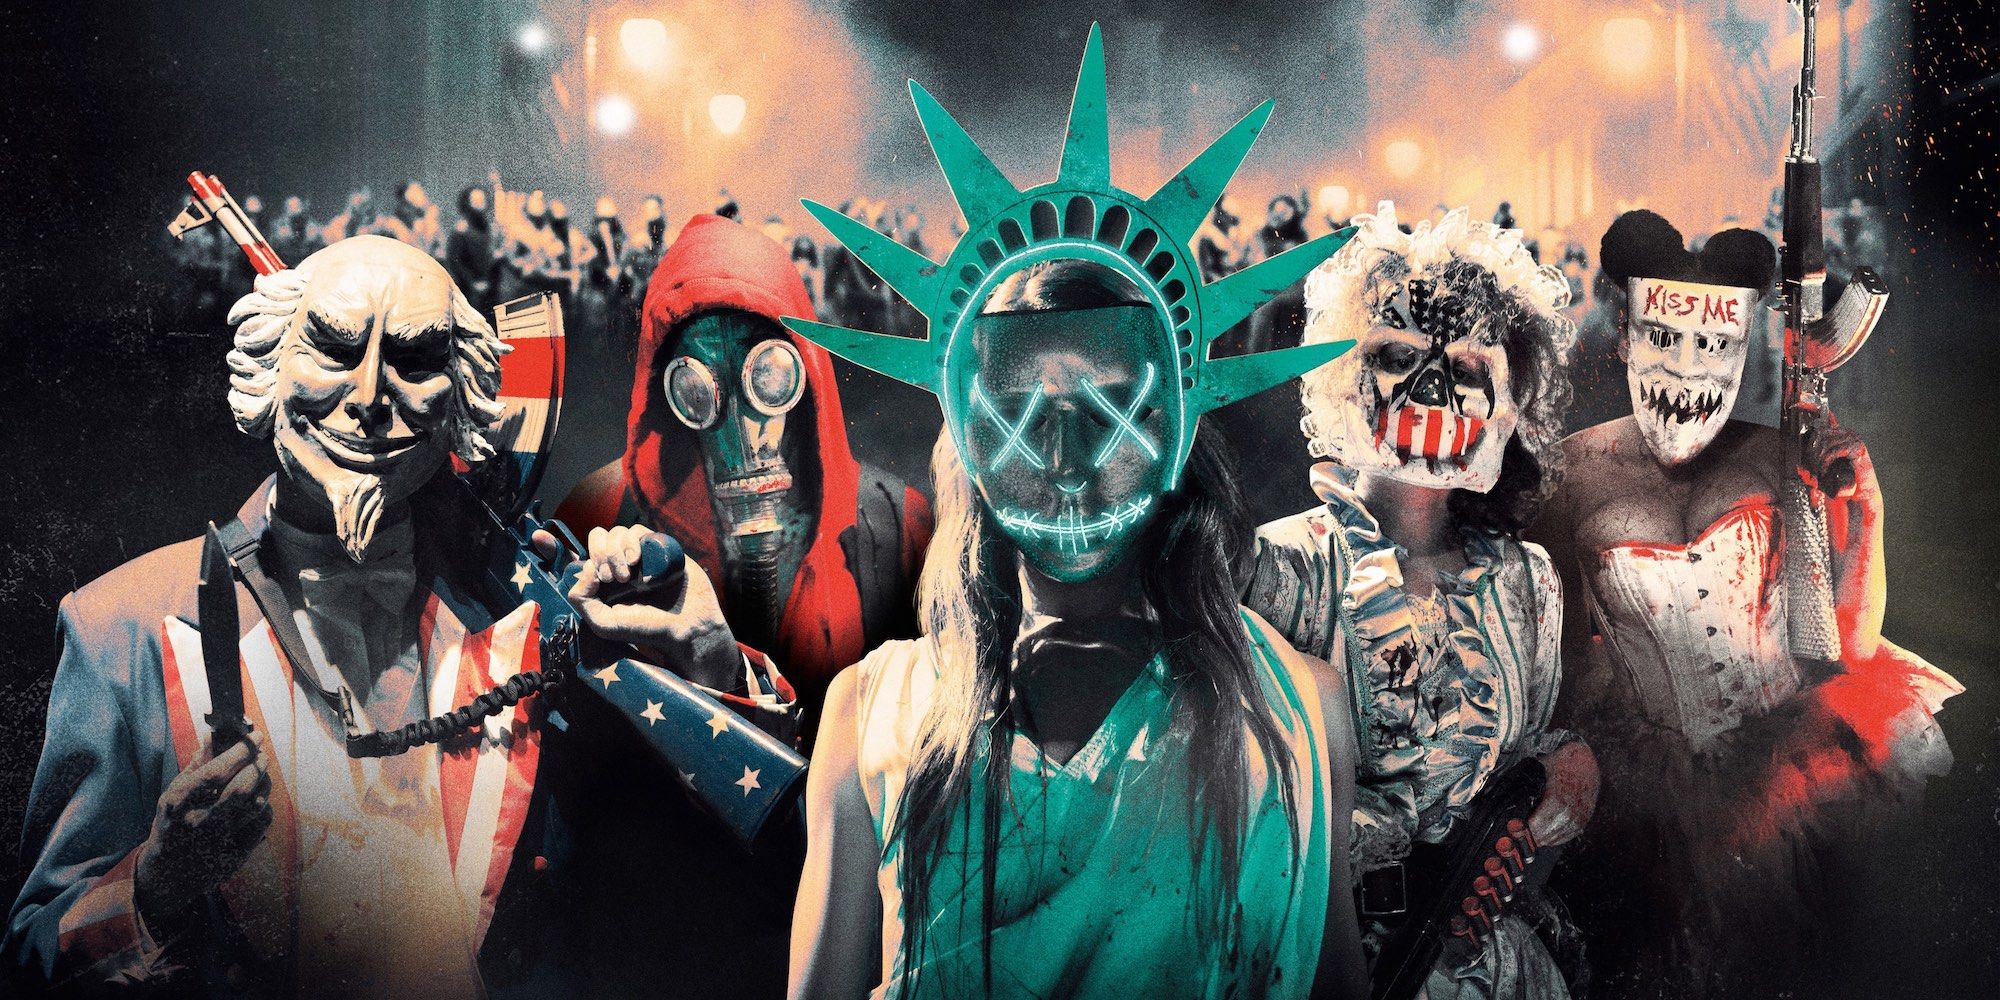 The Purge Election Year